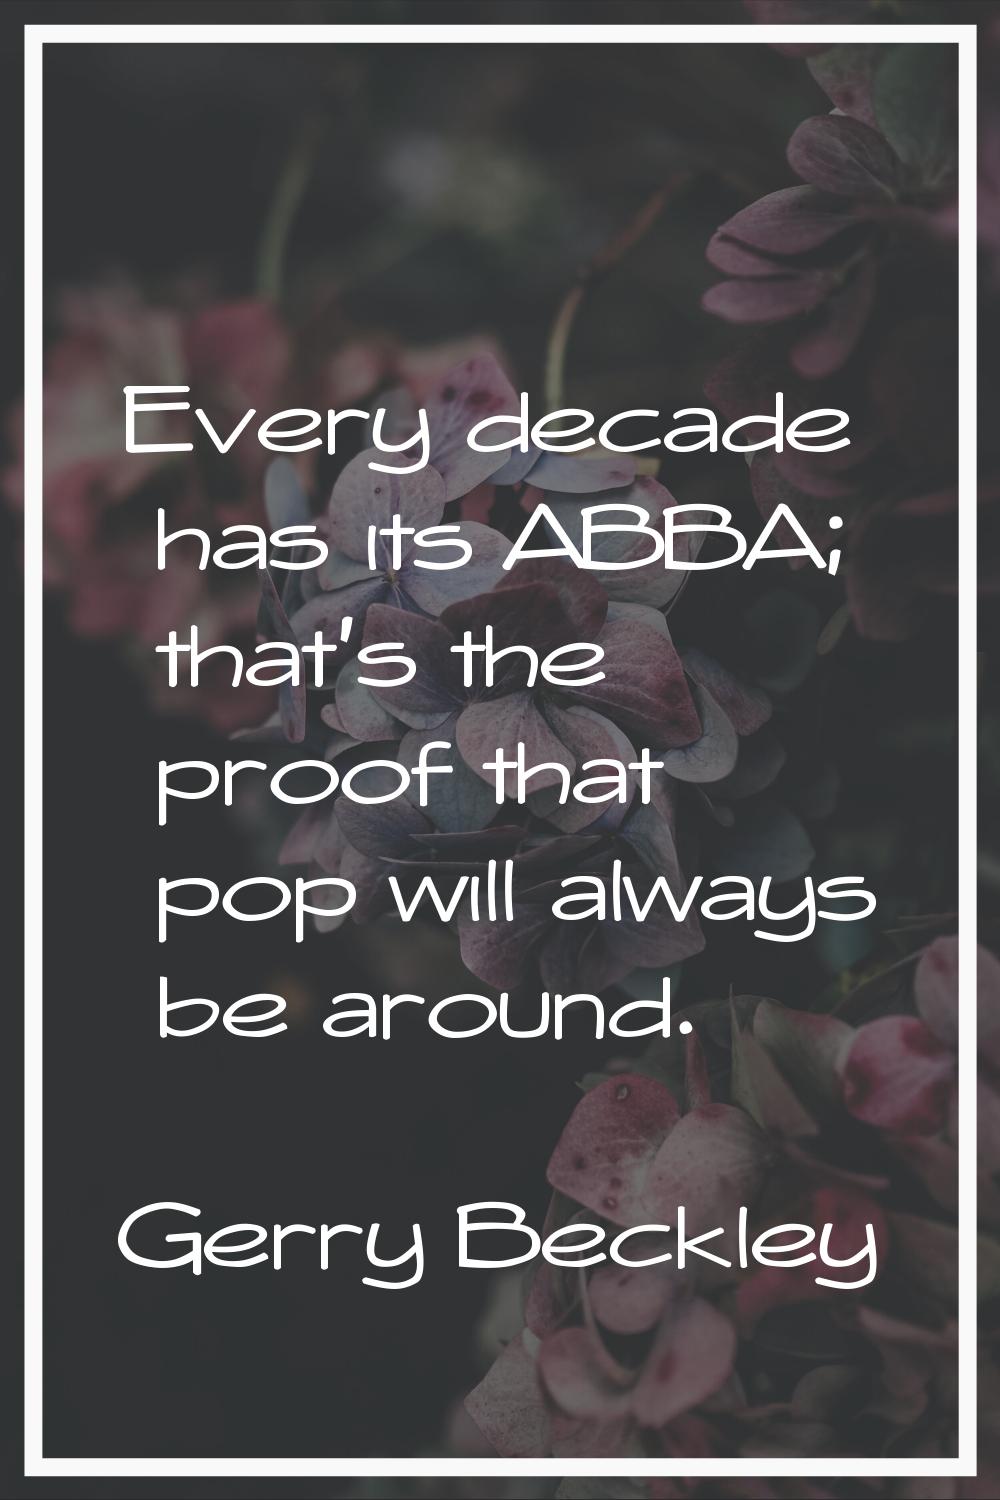 Every decade has its ABBA; that's the proof that pop will always be around.